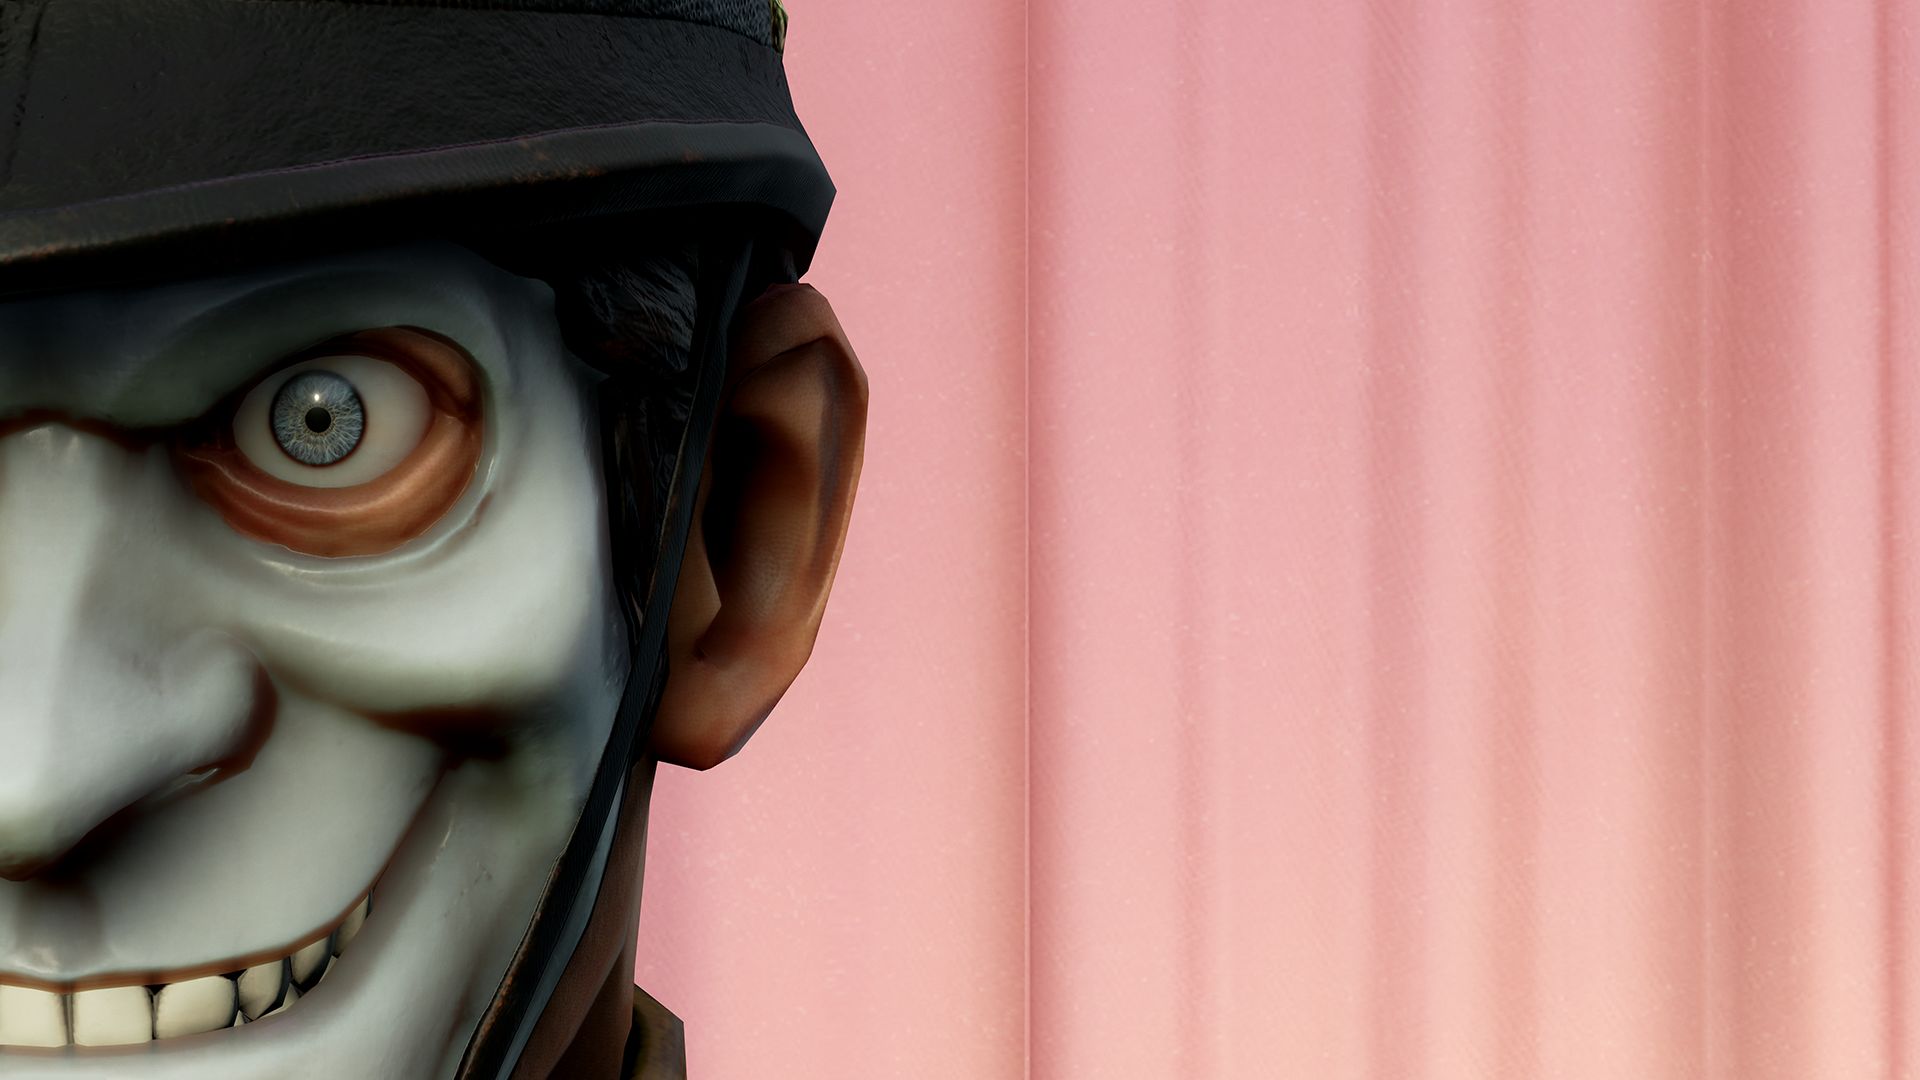 video game, we happy few images